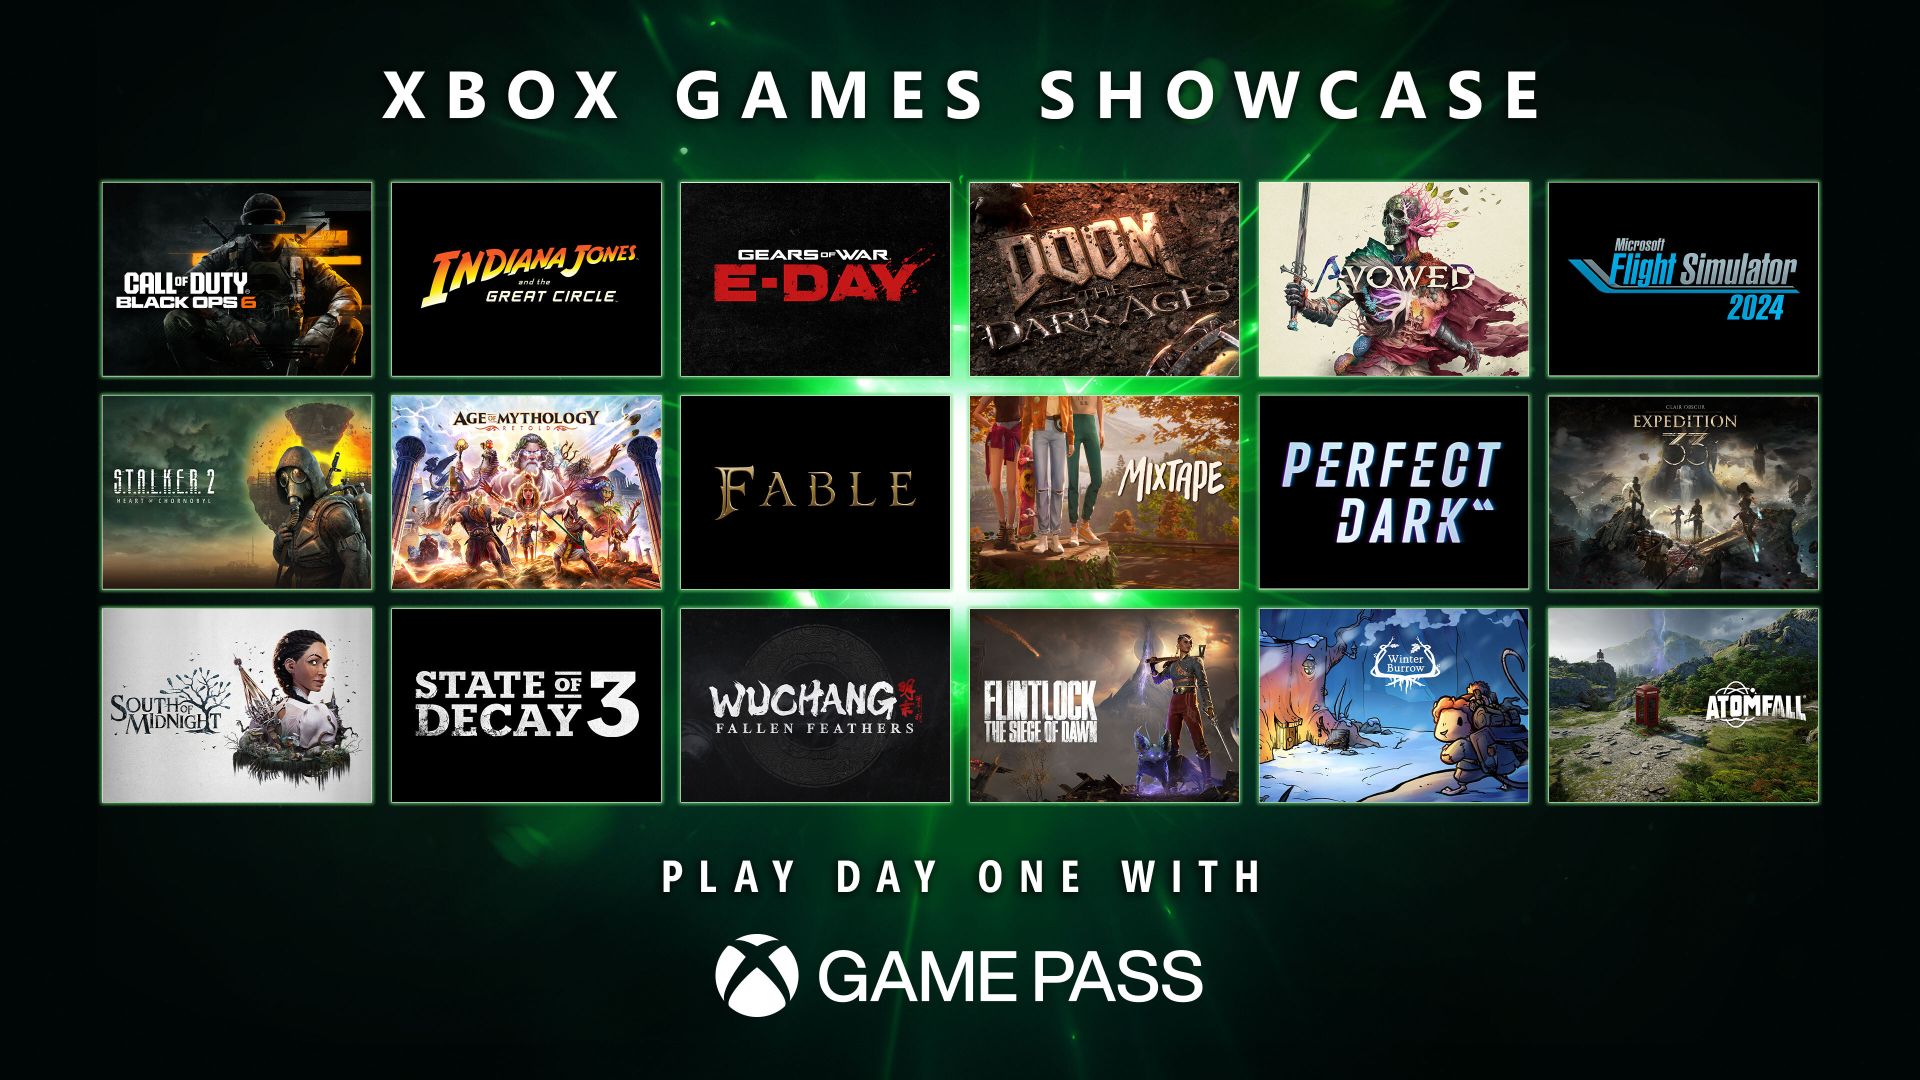 Coming to Game Pass: EA Sports FC 24, My Time at Sandrock, Robin Hood – Sherwood Builders, and More